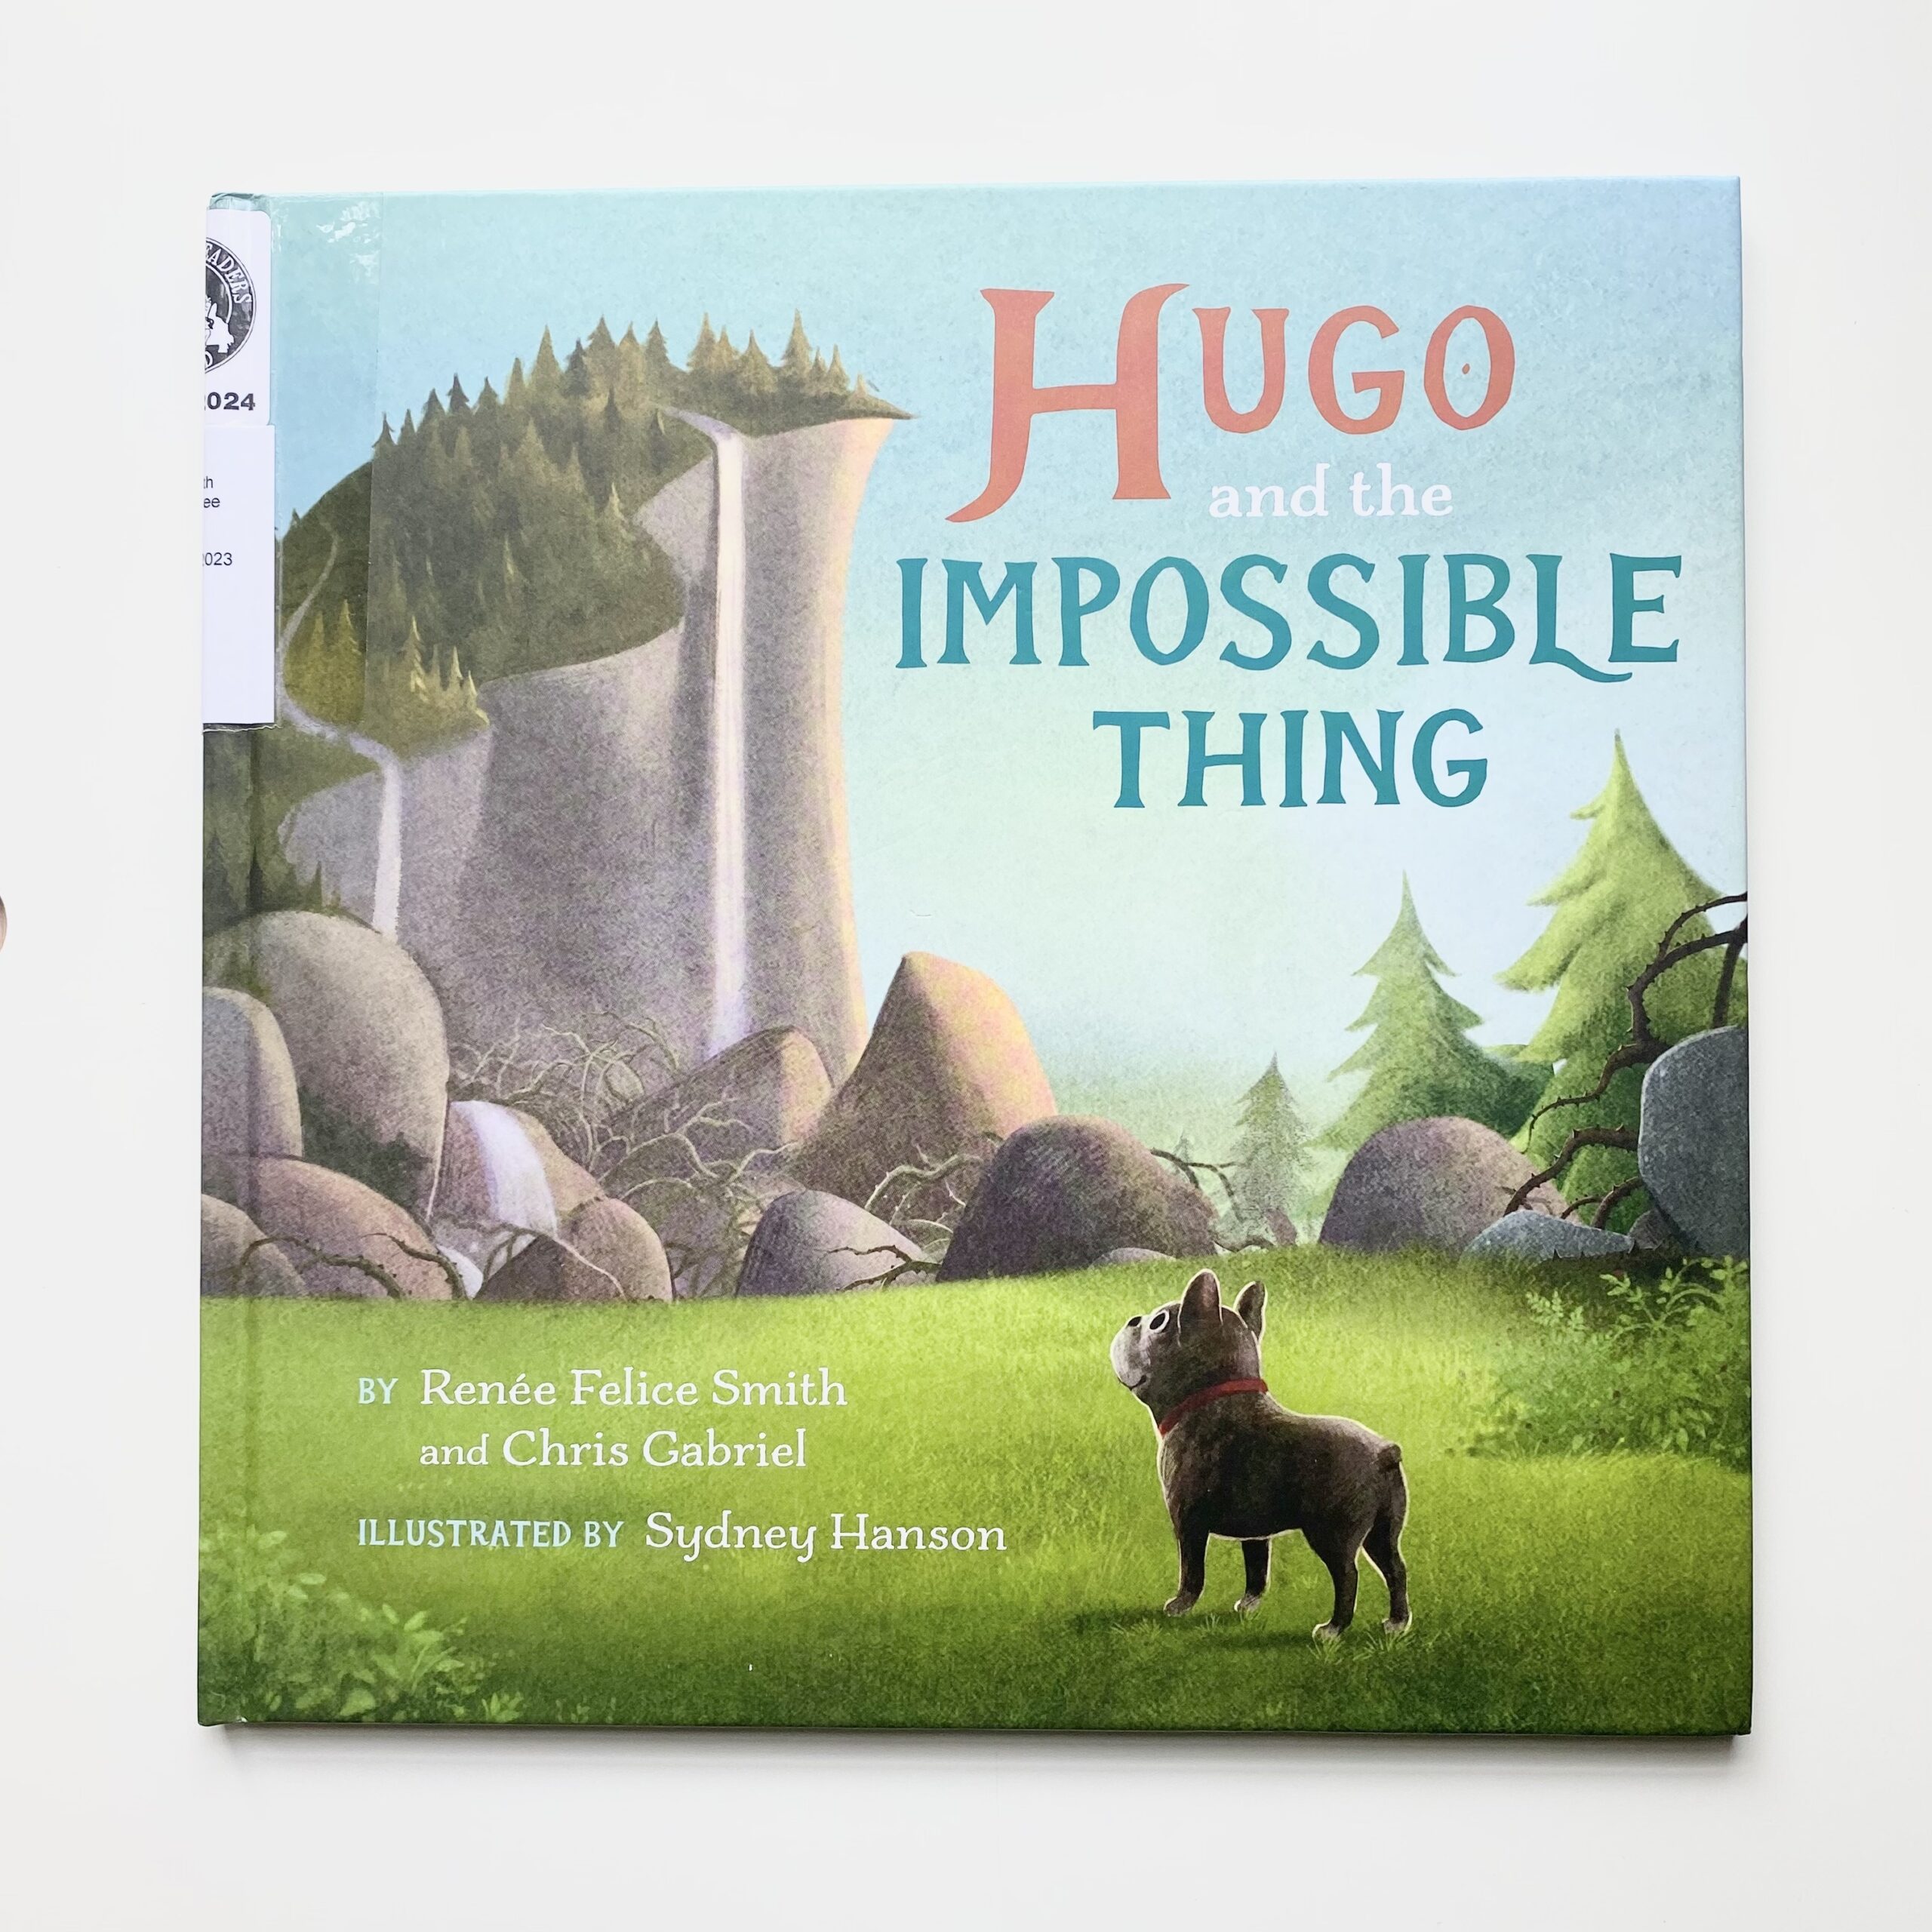 Hugo and the Impossible Thing book by Renee Felice Smith and Chris Gabriel, illustrated by Sydney Hanson